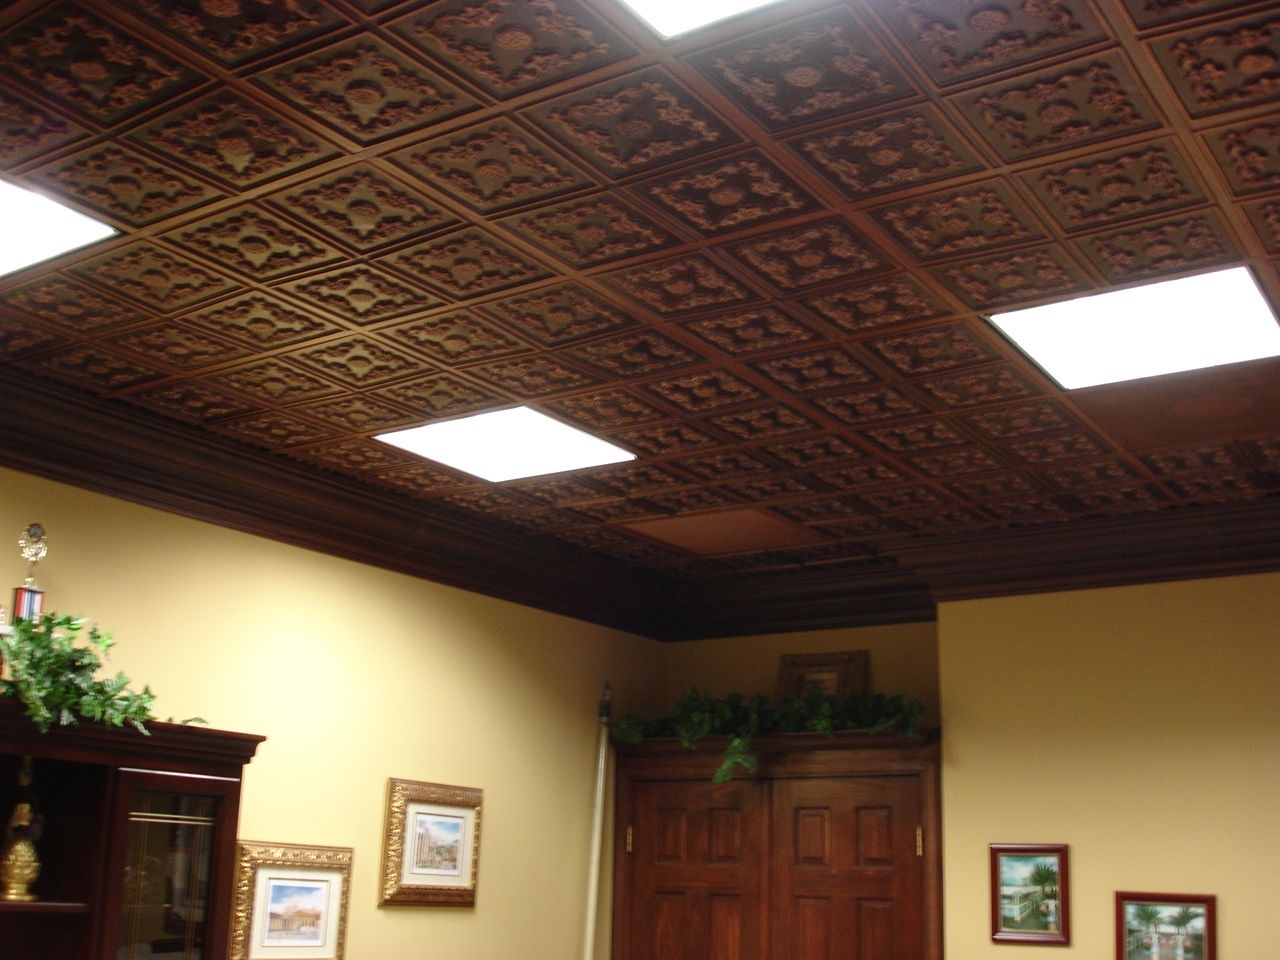 Permalink to Led Lighted Ceiling Tiles